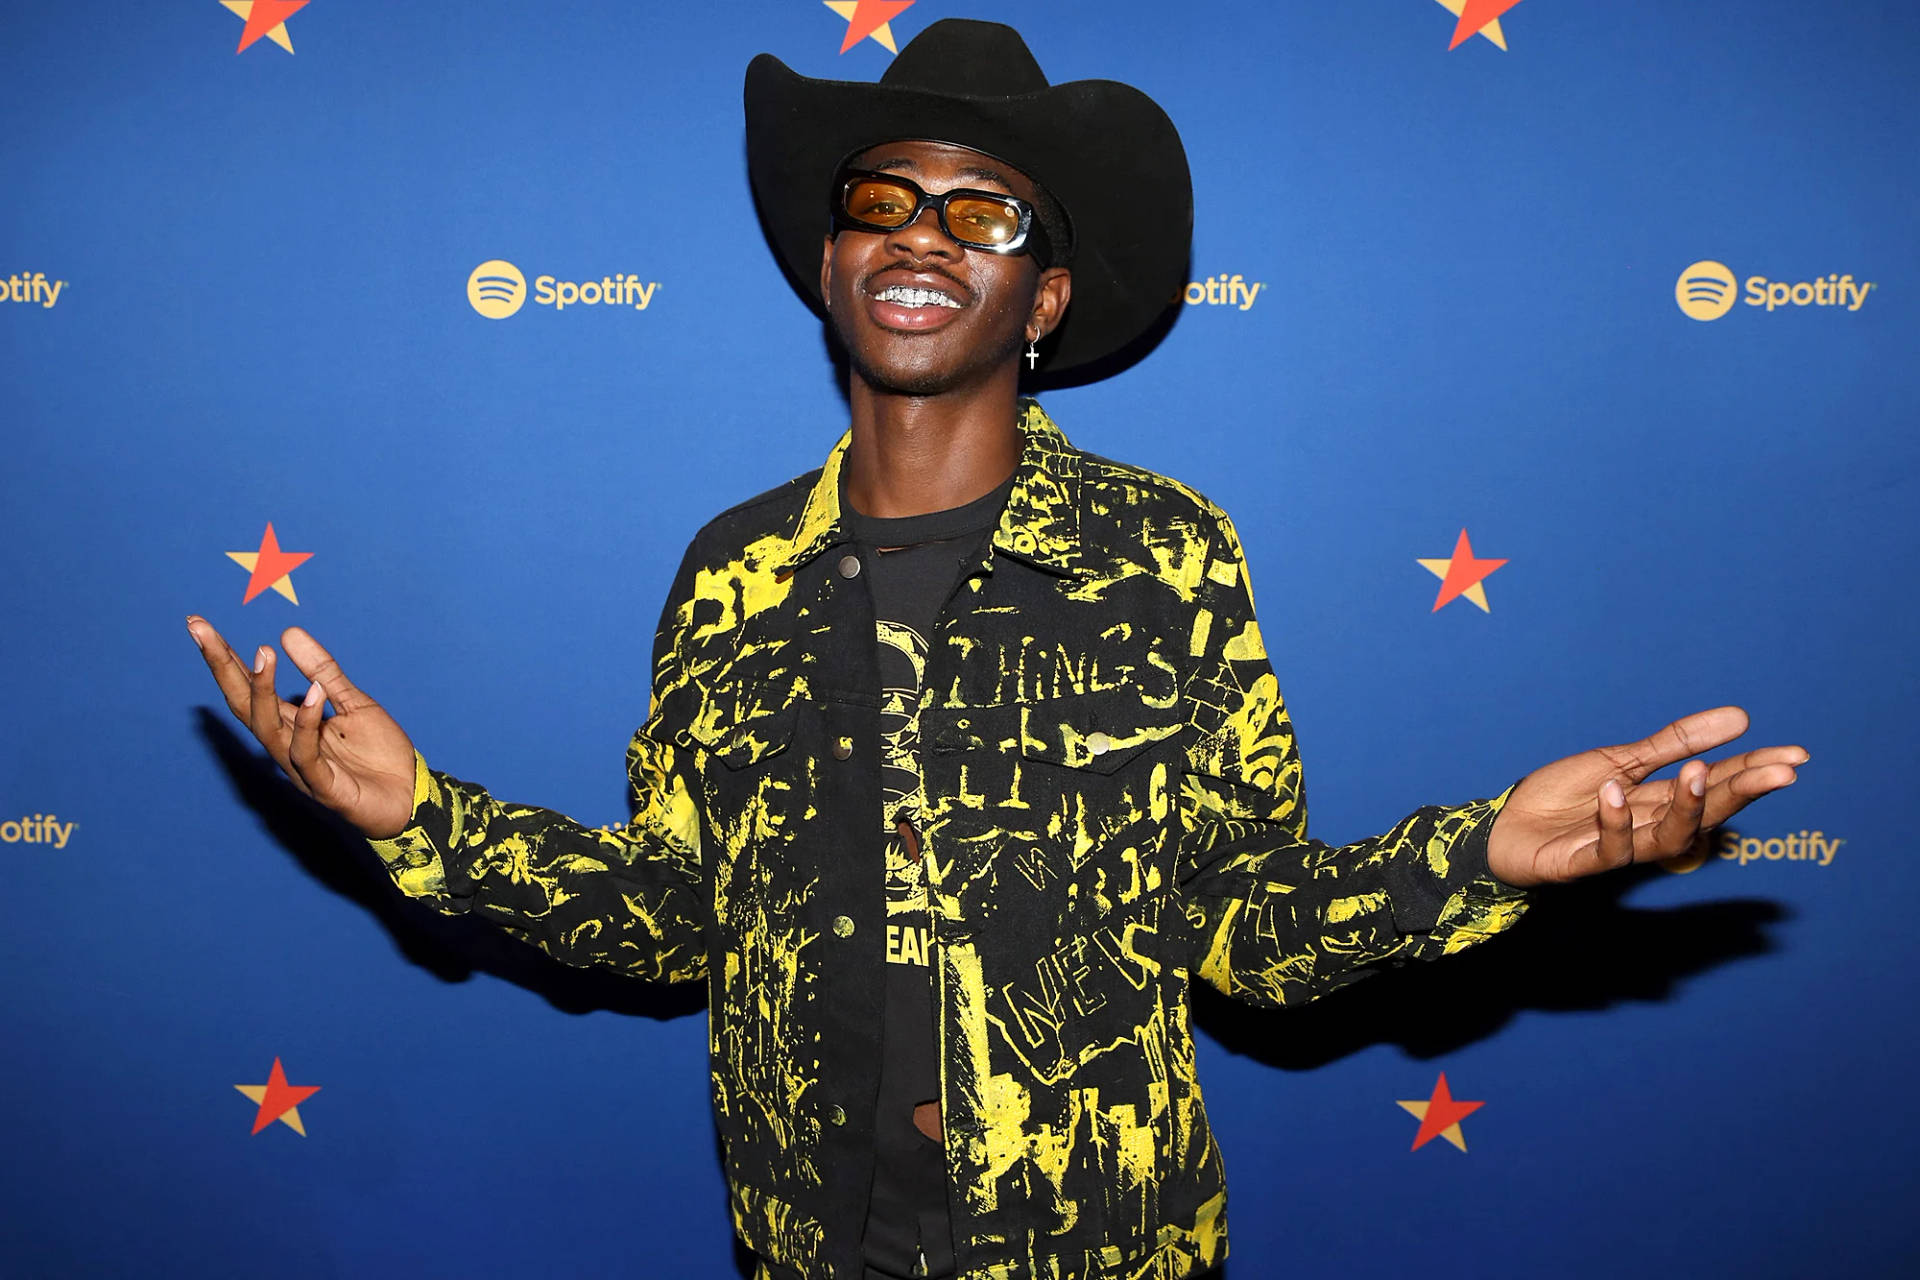 Lil Nas X At Spotify Event Background